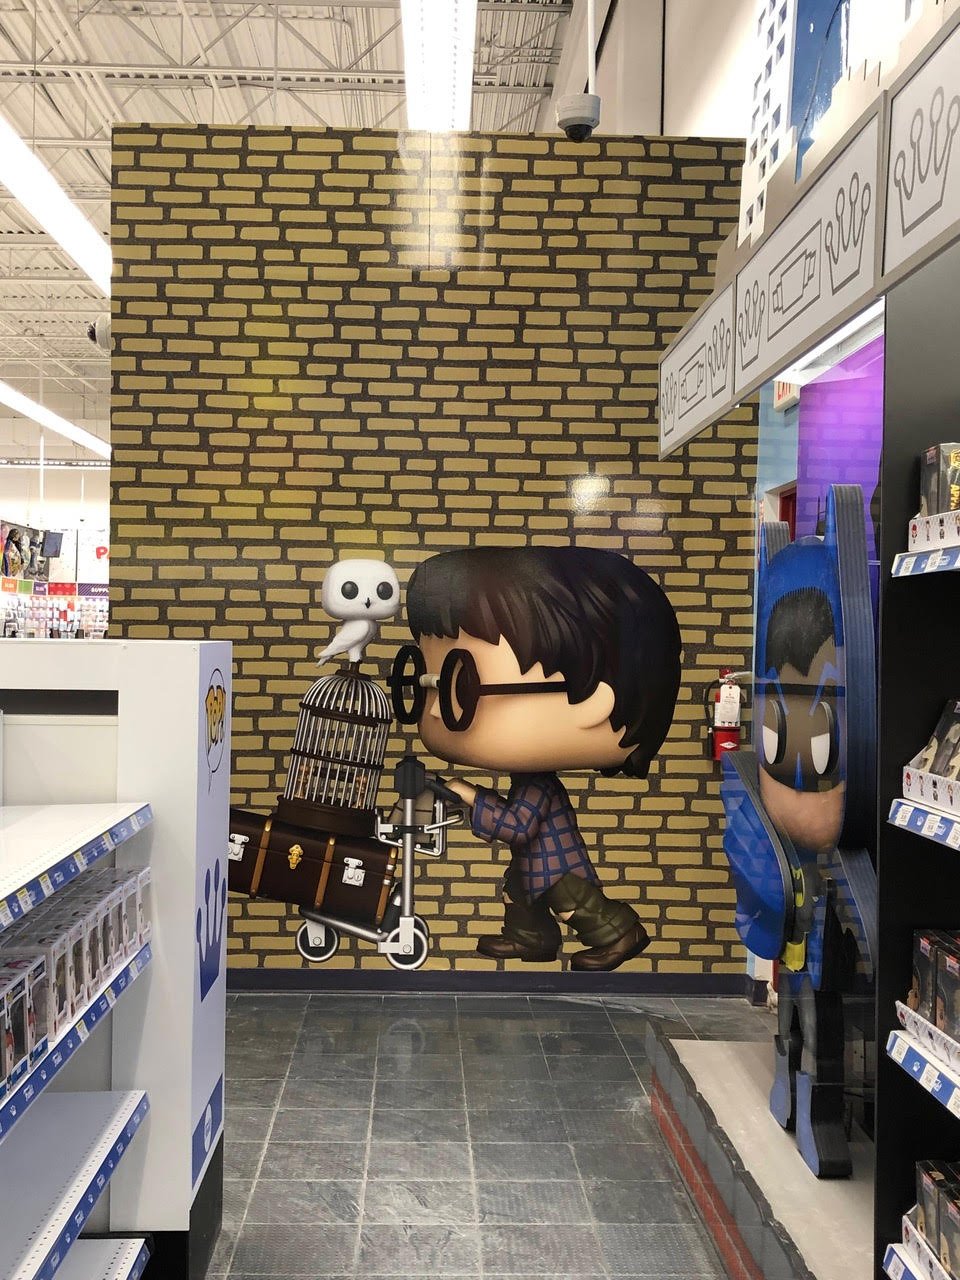 Funko at Toys R Us - Harry Potter Graphic Wall